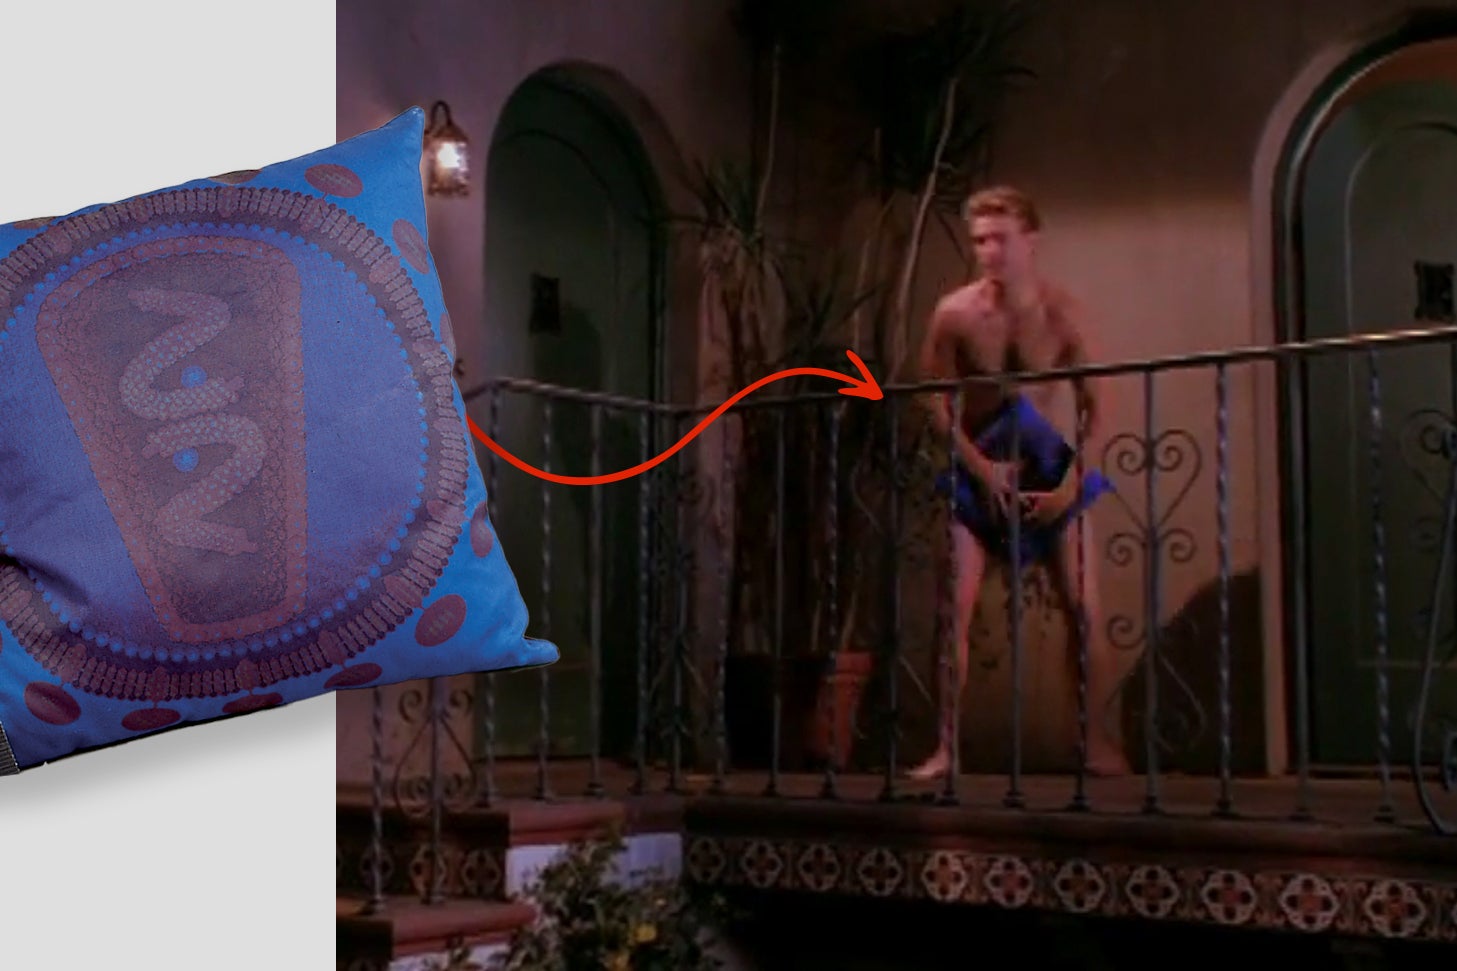 A nude man on Melrose Place stands on a balcony, holding a pillow patterned with the AIDS virus to cover himself.